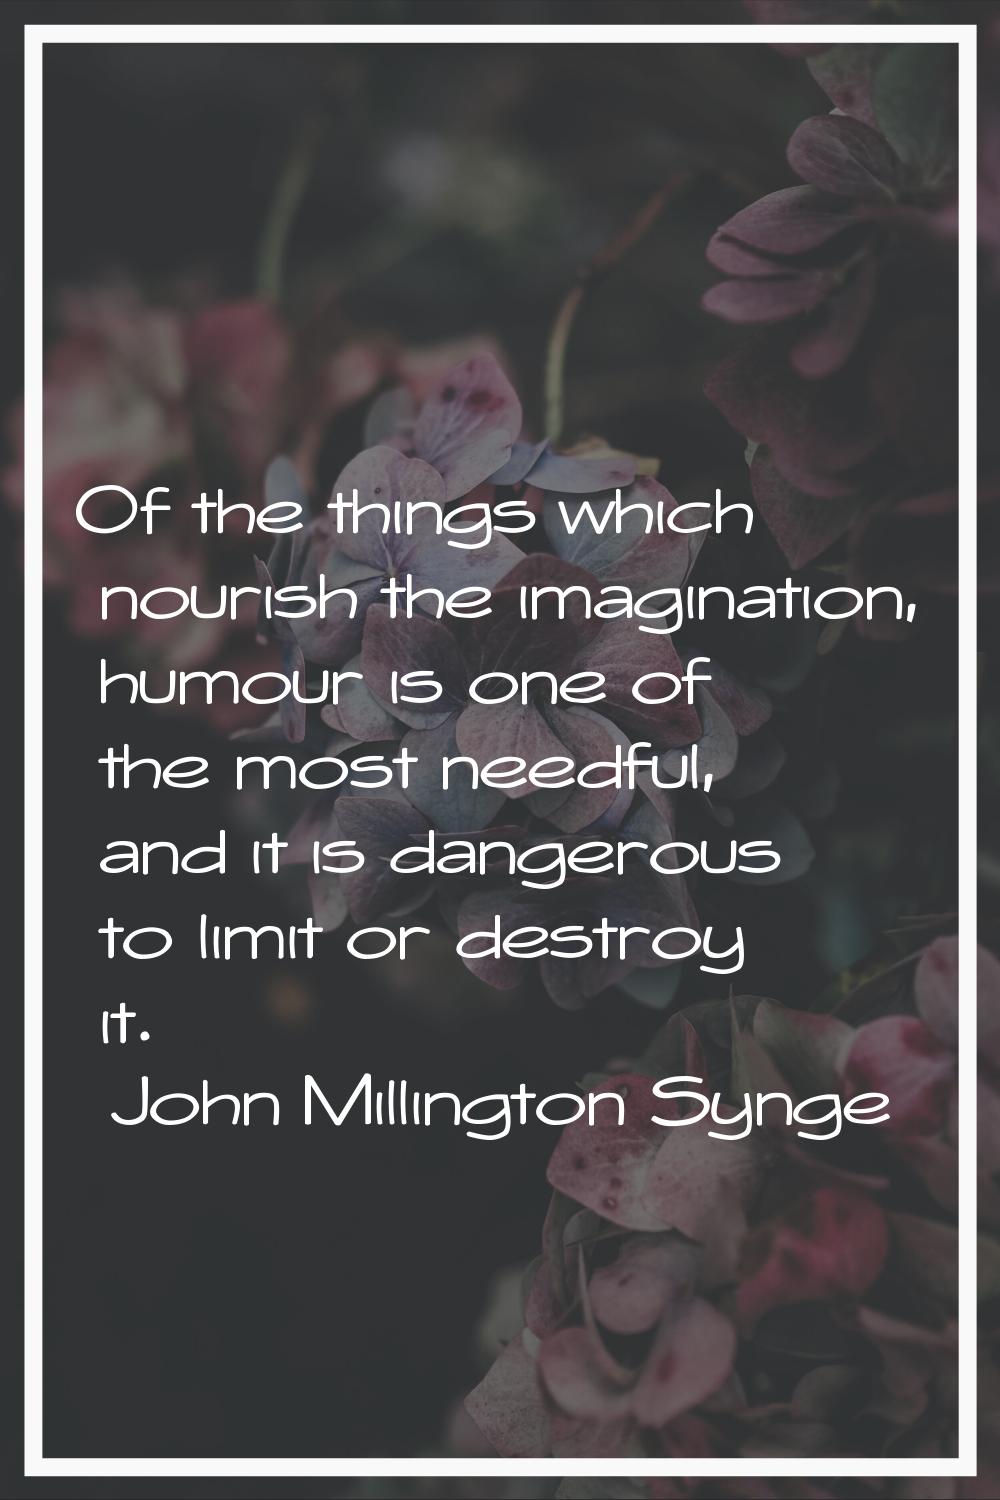 Of the things which nourish the imagination, humour is one of the most needful, and it is dangerous